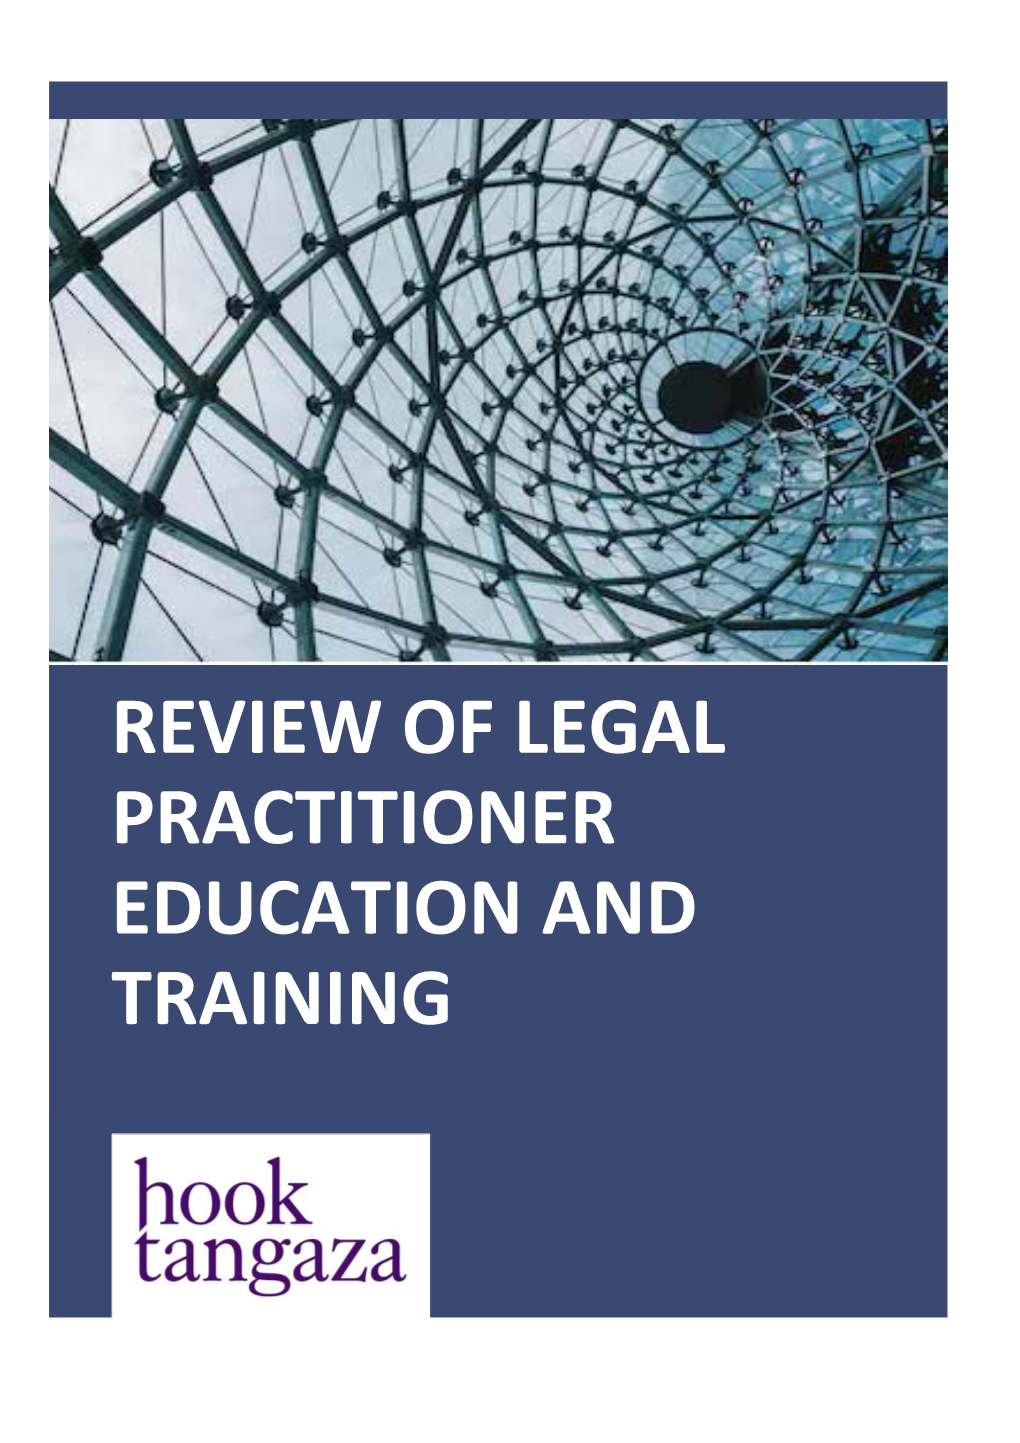 Review of Legal Practitioner Education and Training